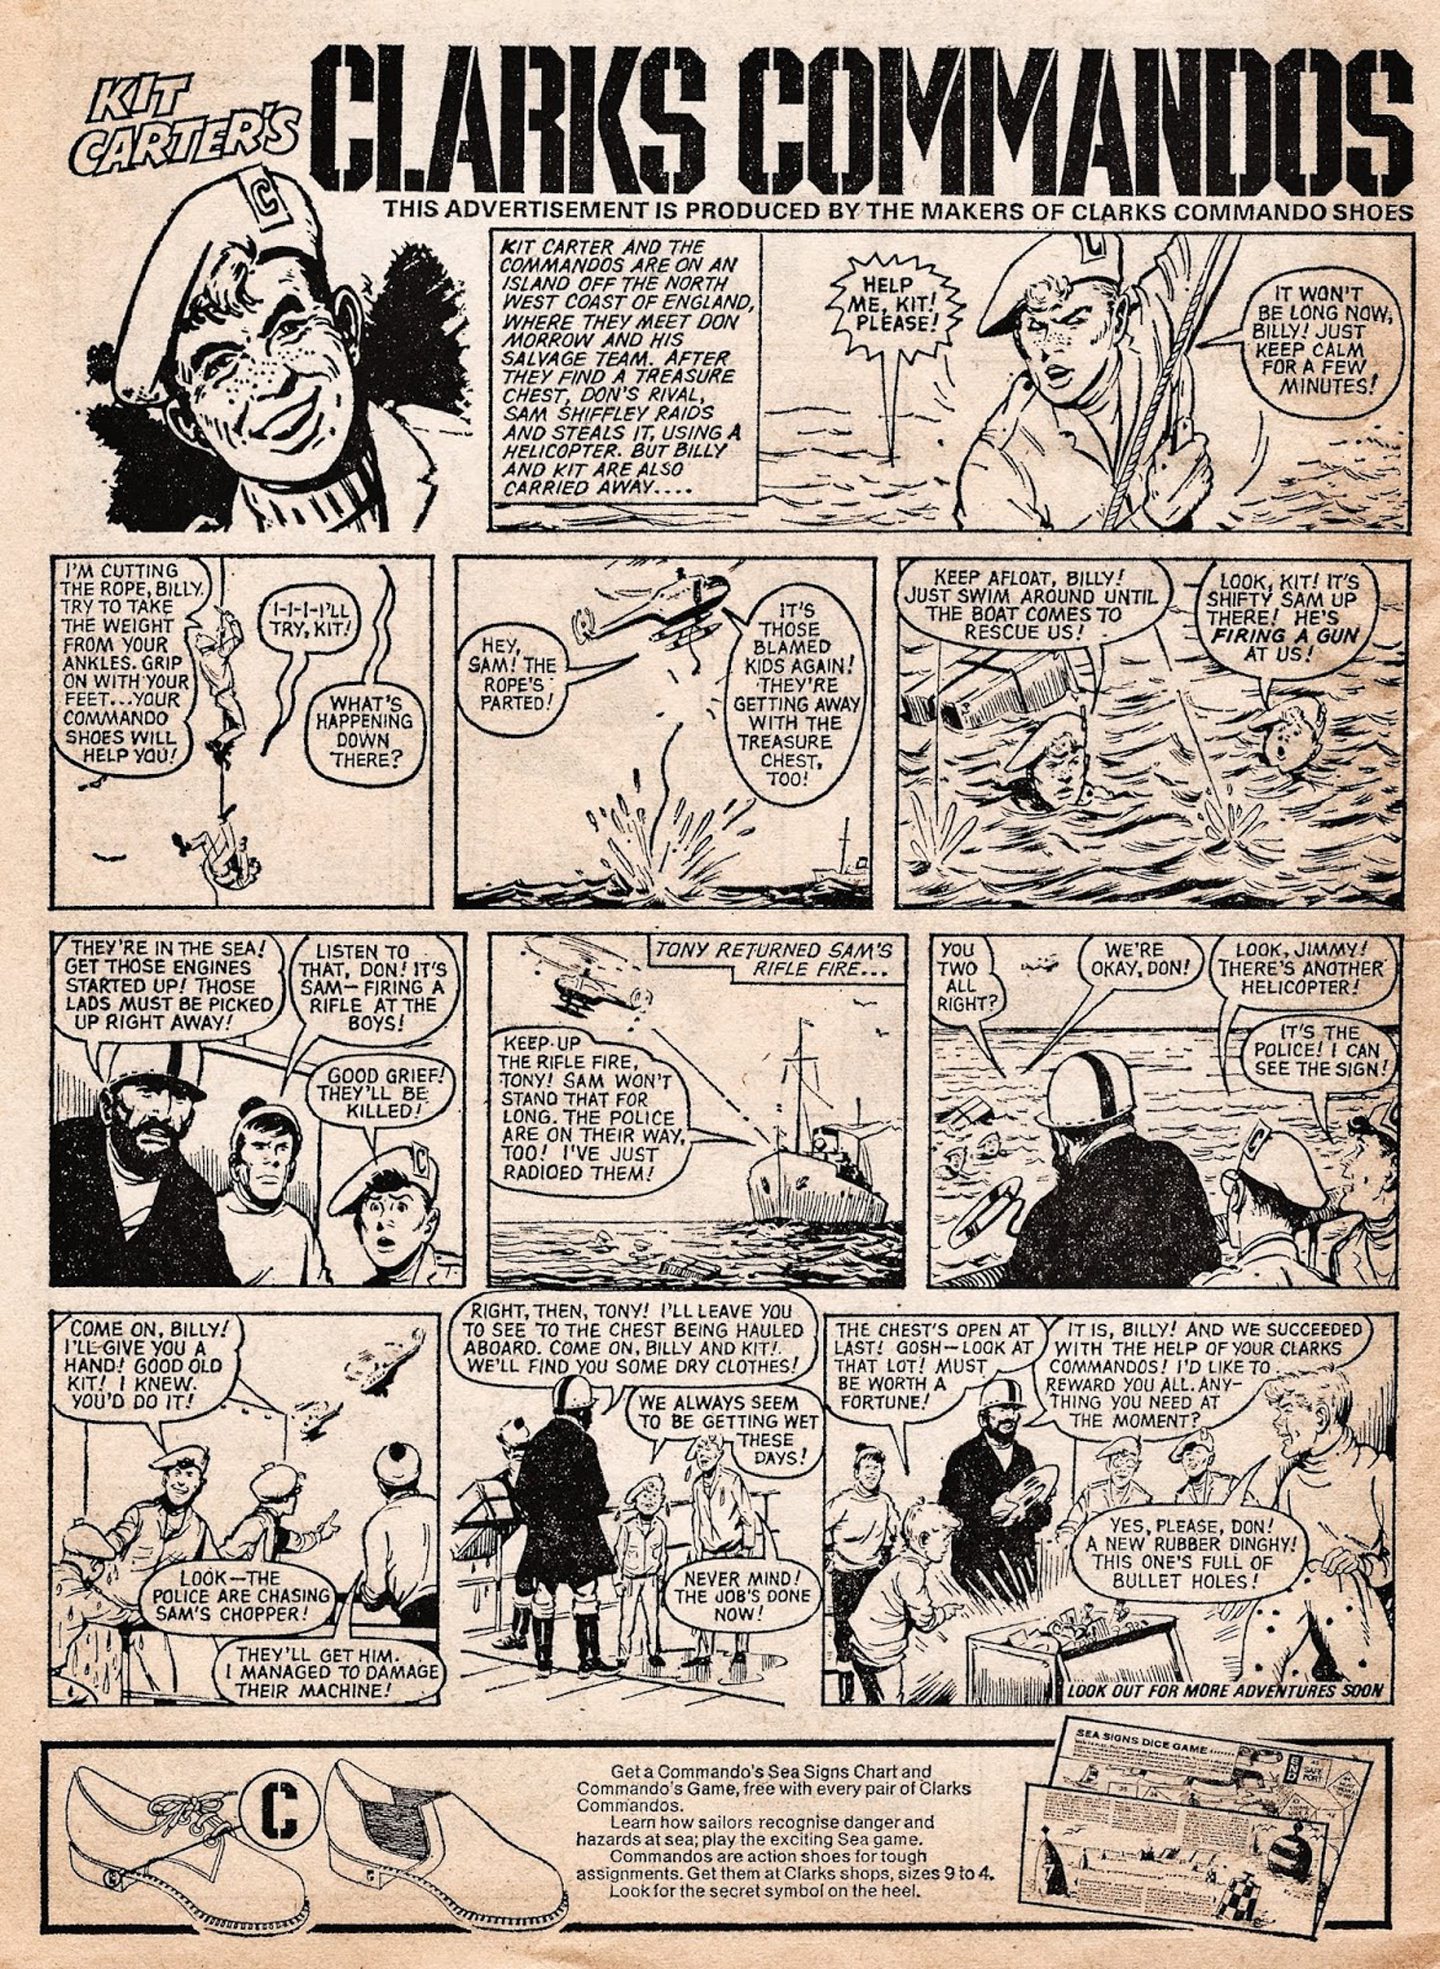 The comic strip with the adventures of Kit and his chums. 